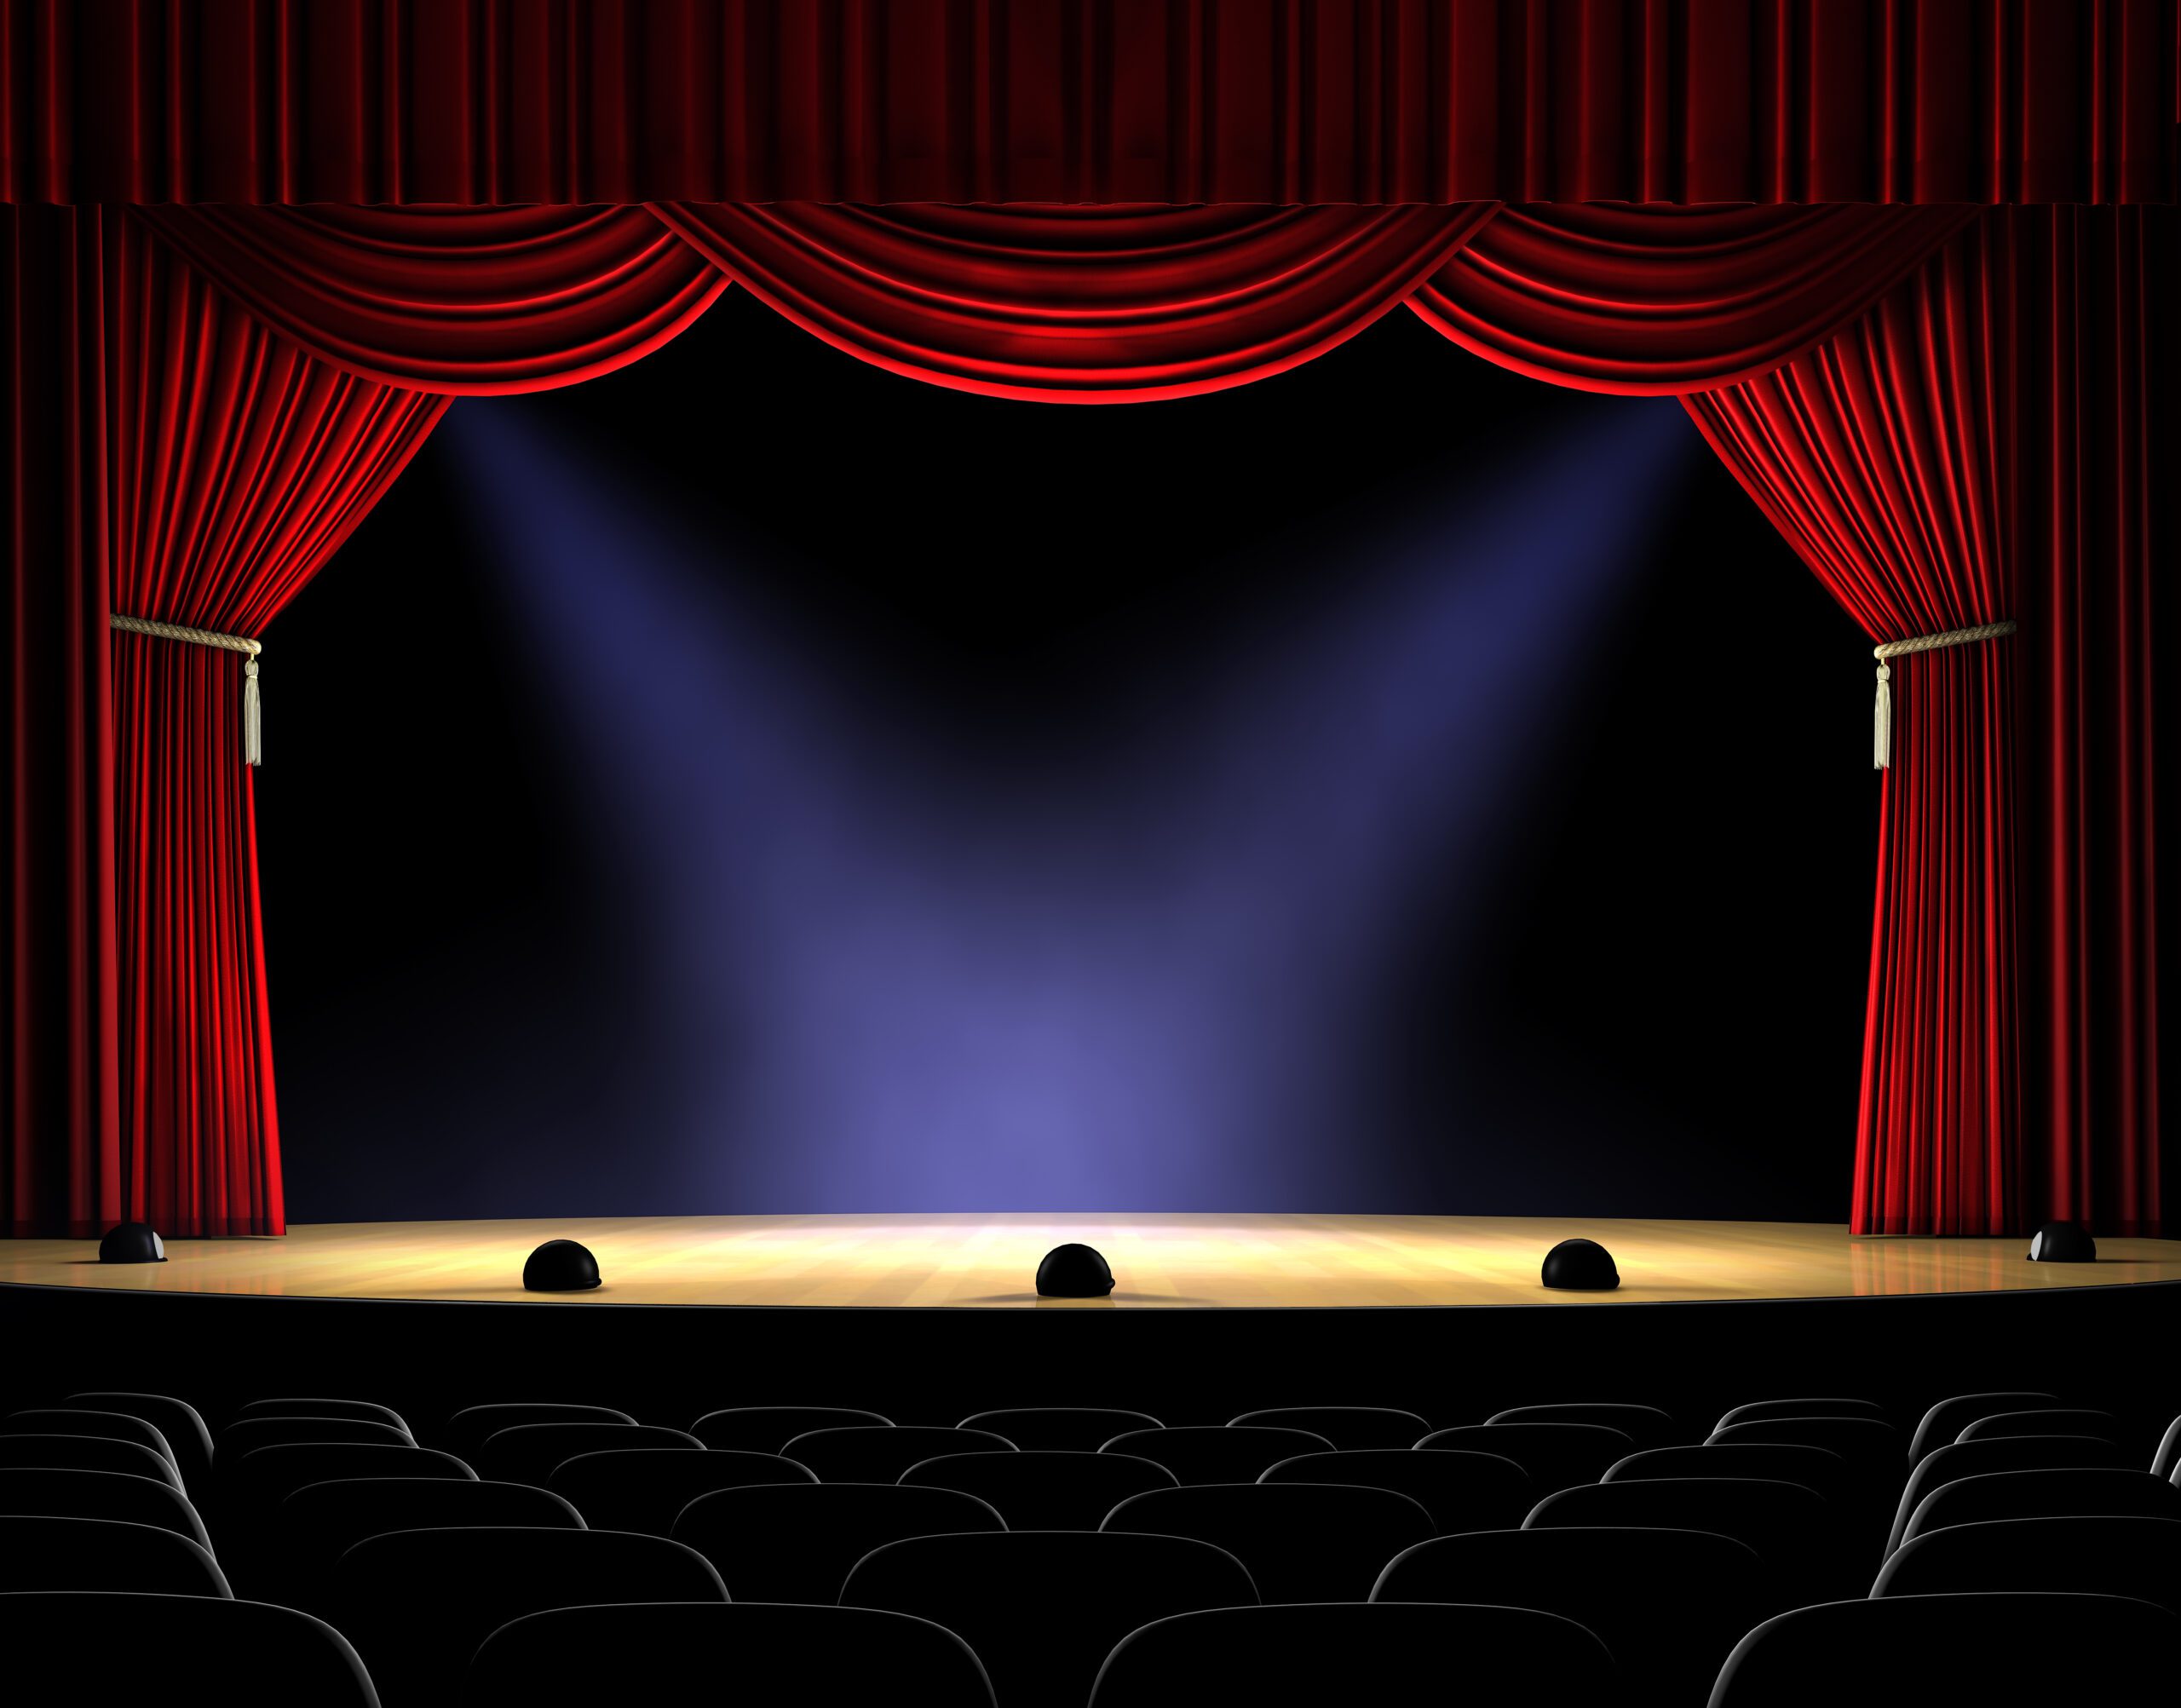 Theatre stage with red curtain and spotlights on the stage floor